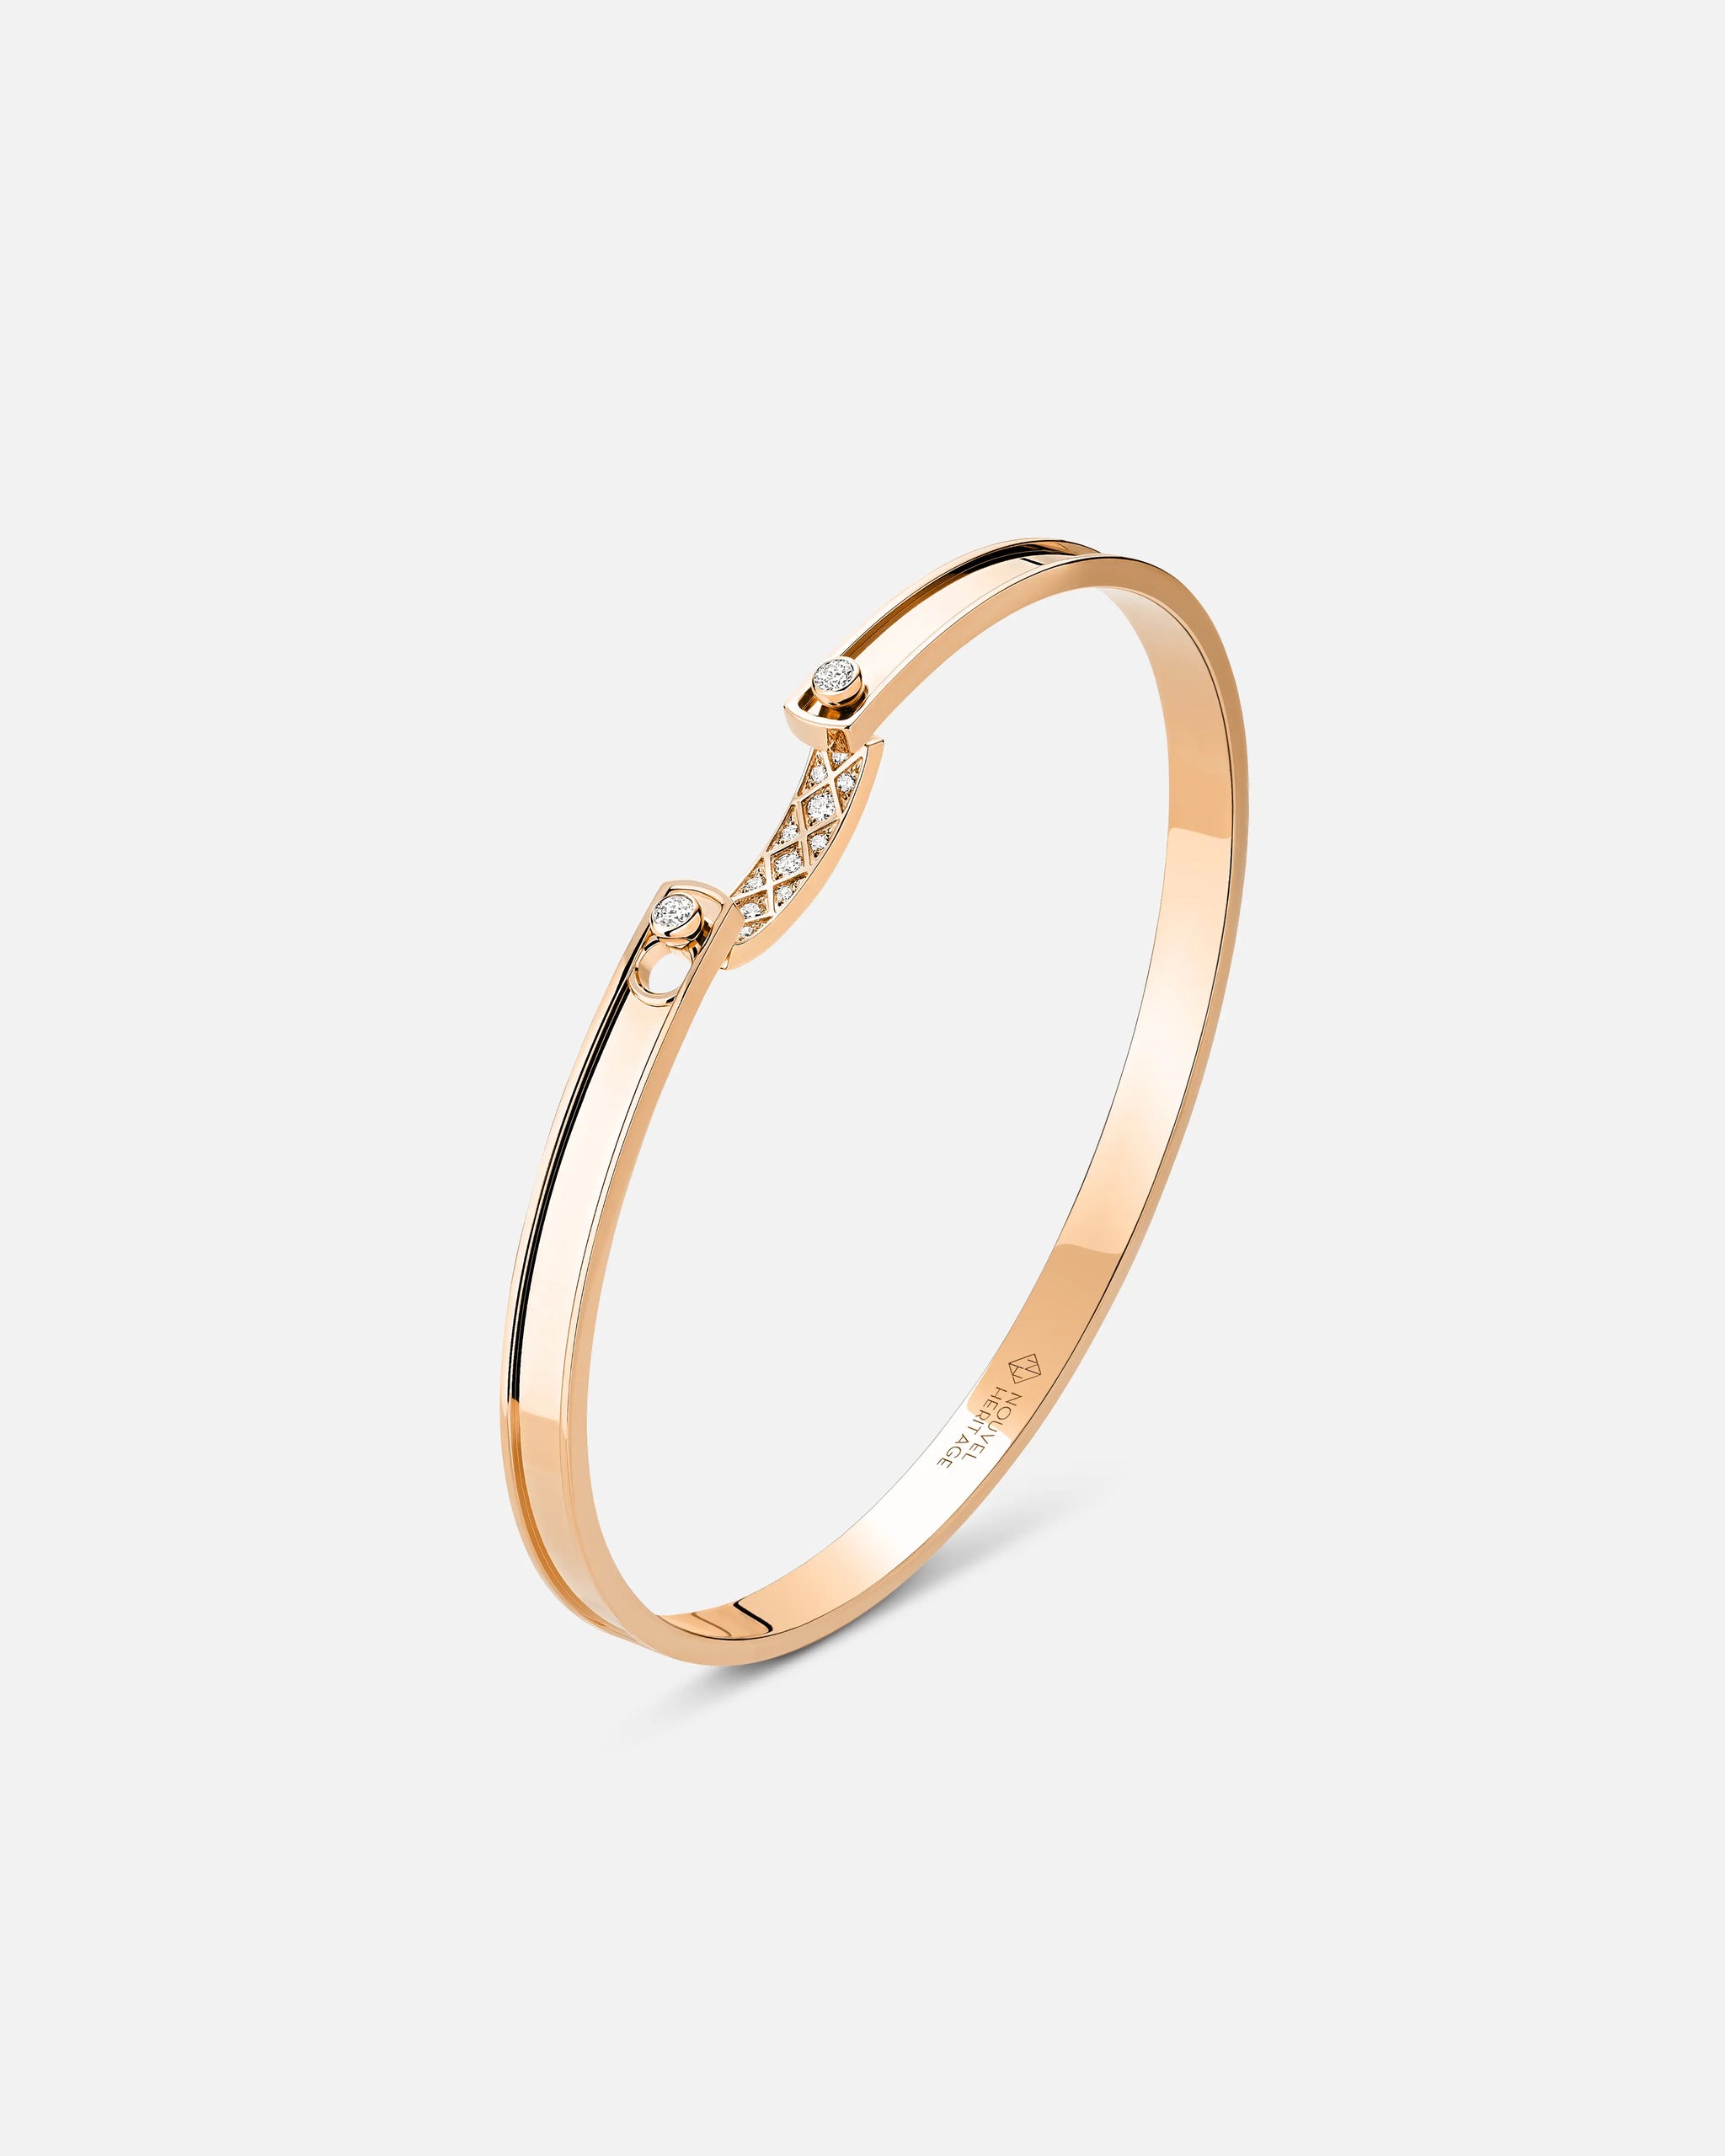 Parisian Stroll Mood Bangle in Rose Gold - 1 - Nouvel Heritage